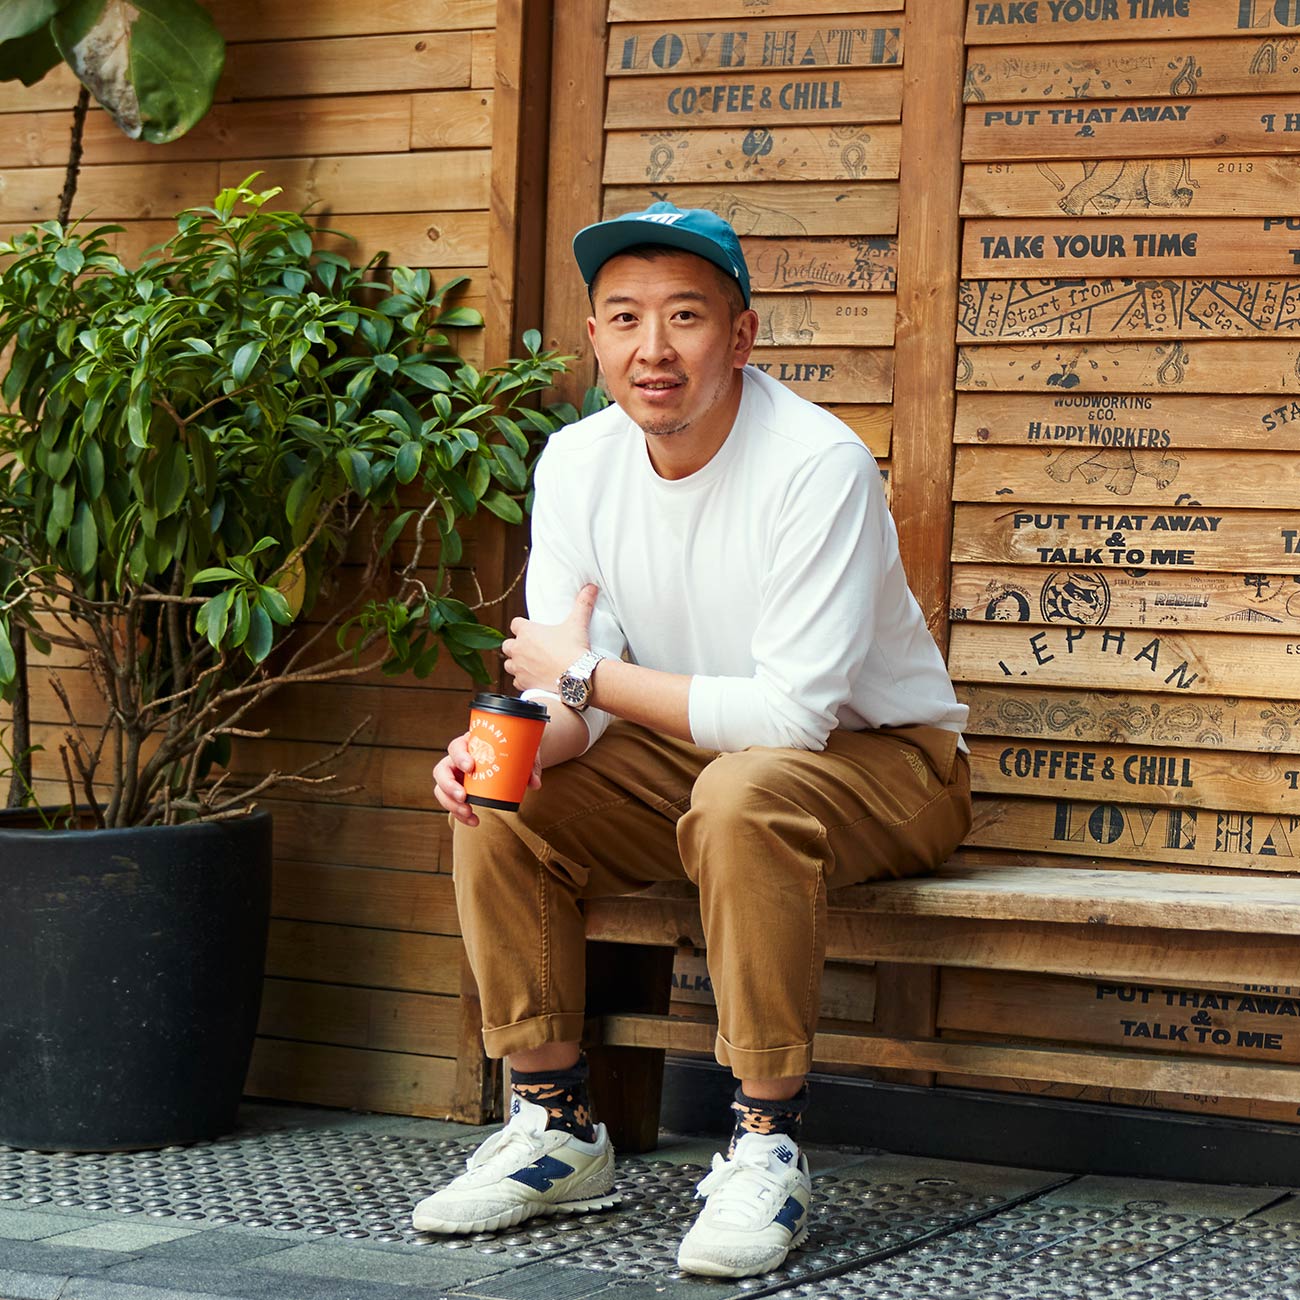 Restaurant entrepreneur Gerald Li is one of the founders of Elephant Grounds through his brand Leading Nation